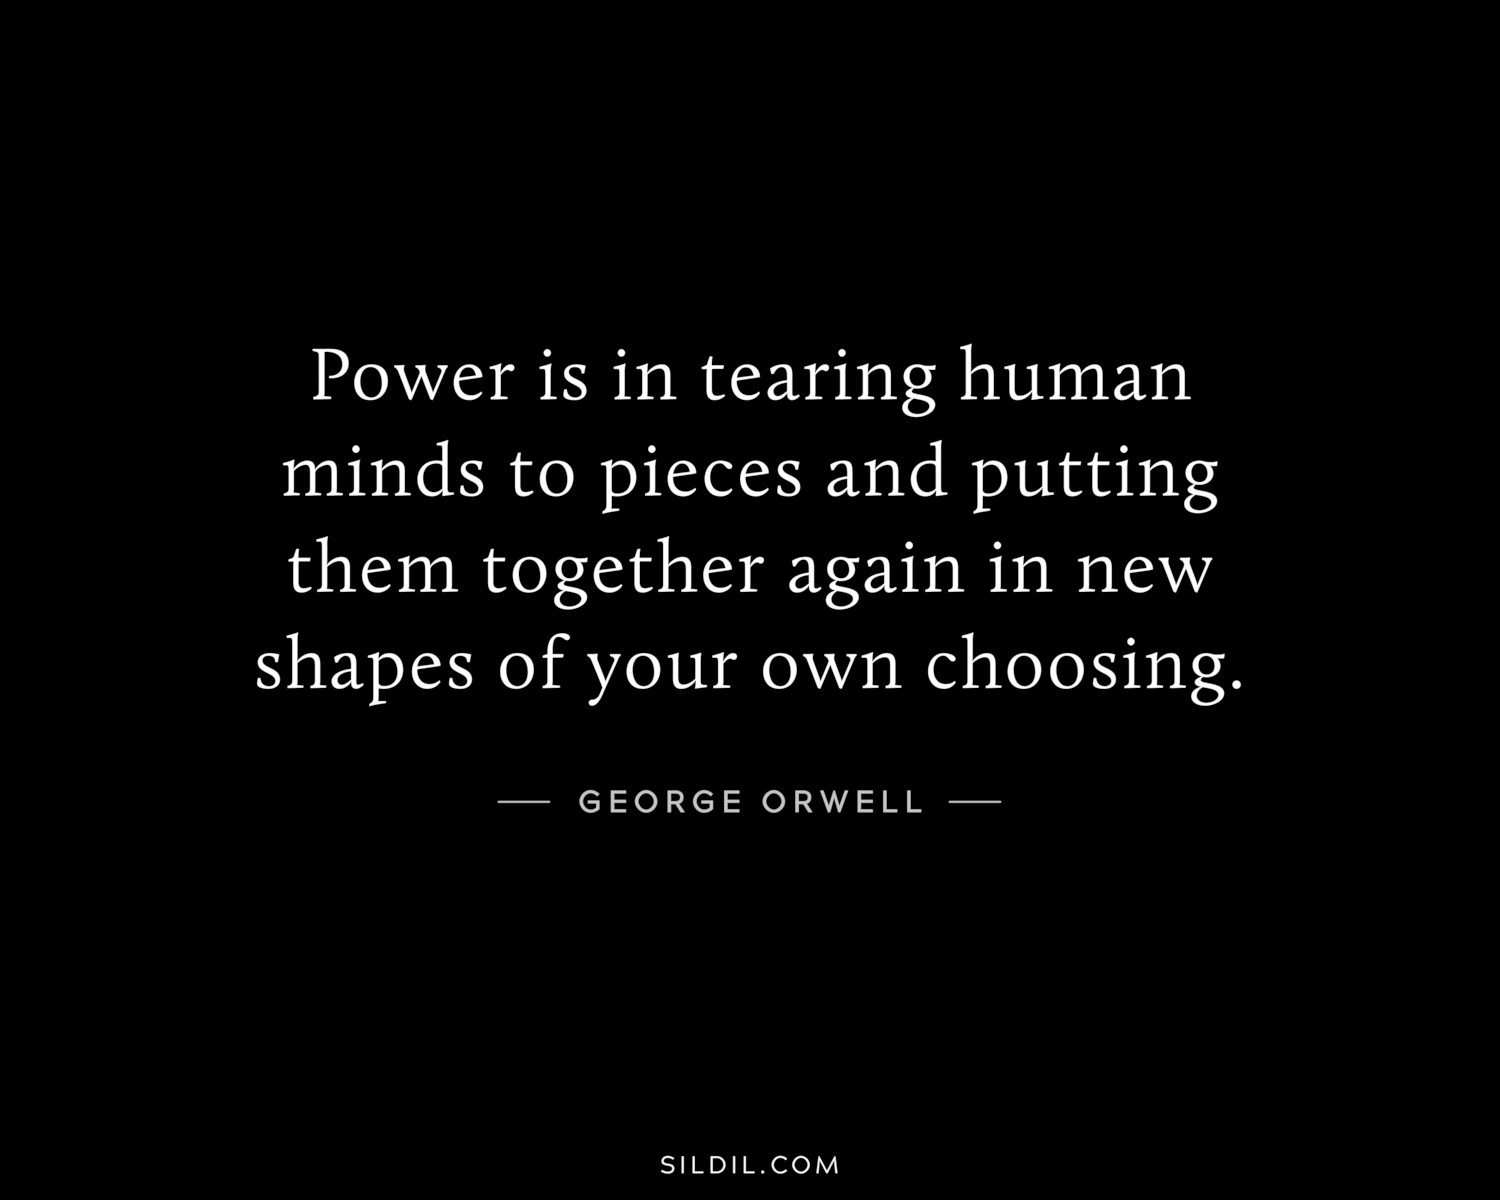 Power is in tearing human minds to pieces and putting them together again in new shapes of your own choosing.